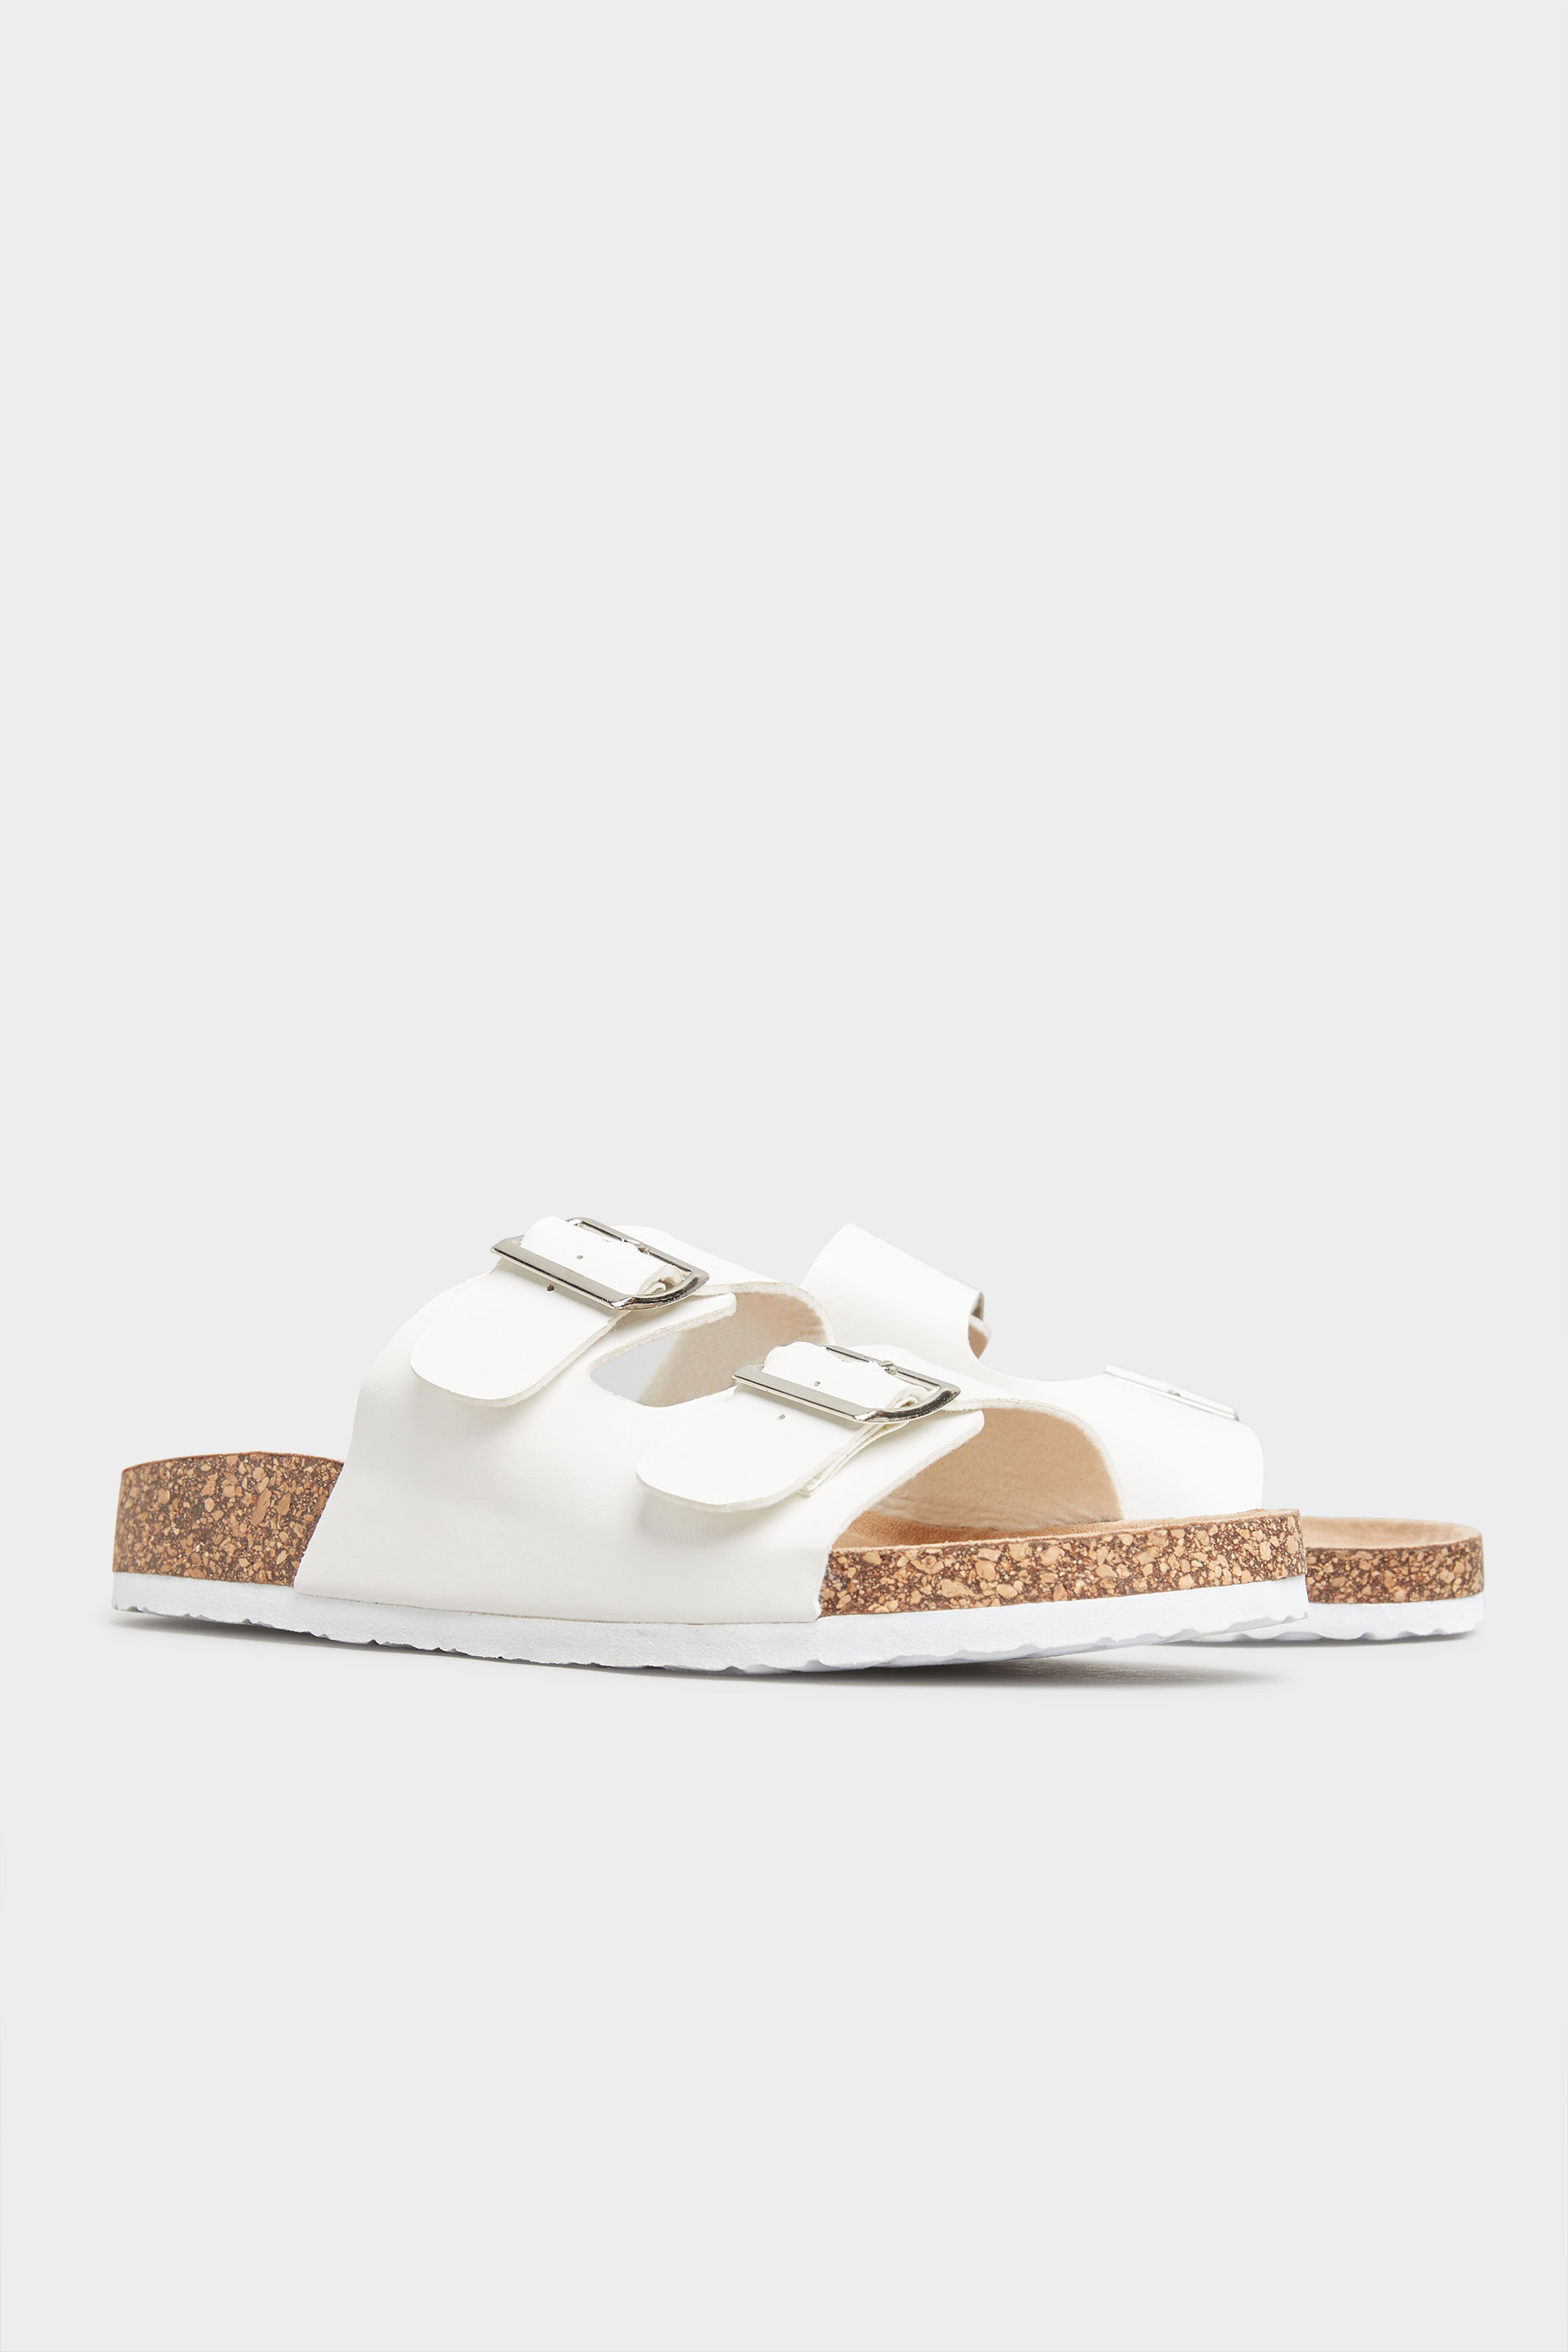 White Buckle Strap Footbed Sandals In Extra Wide Fit_B.jpg